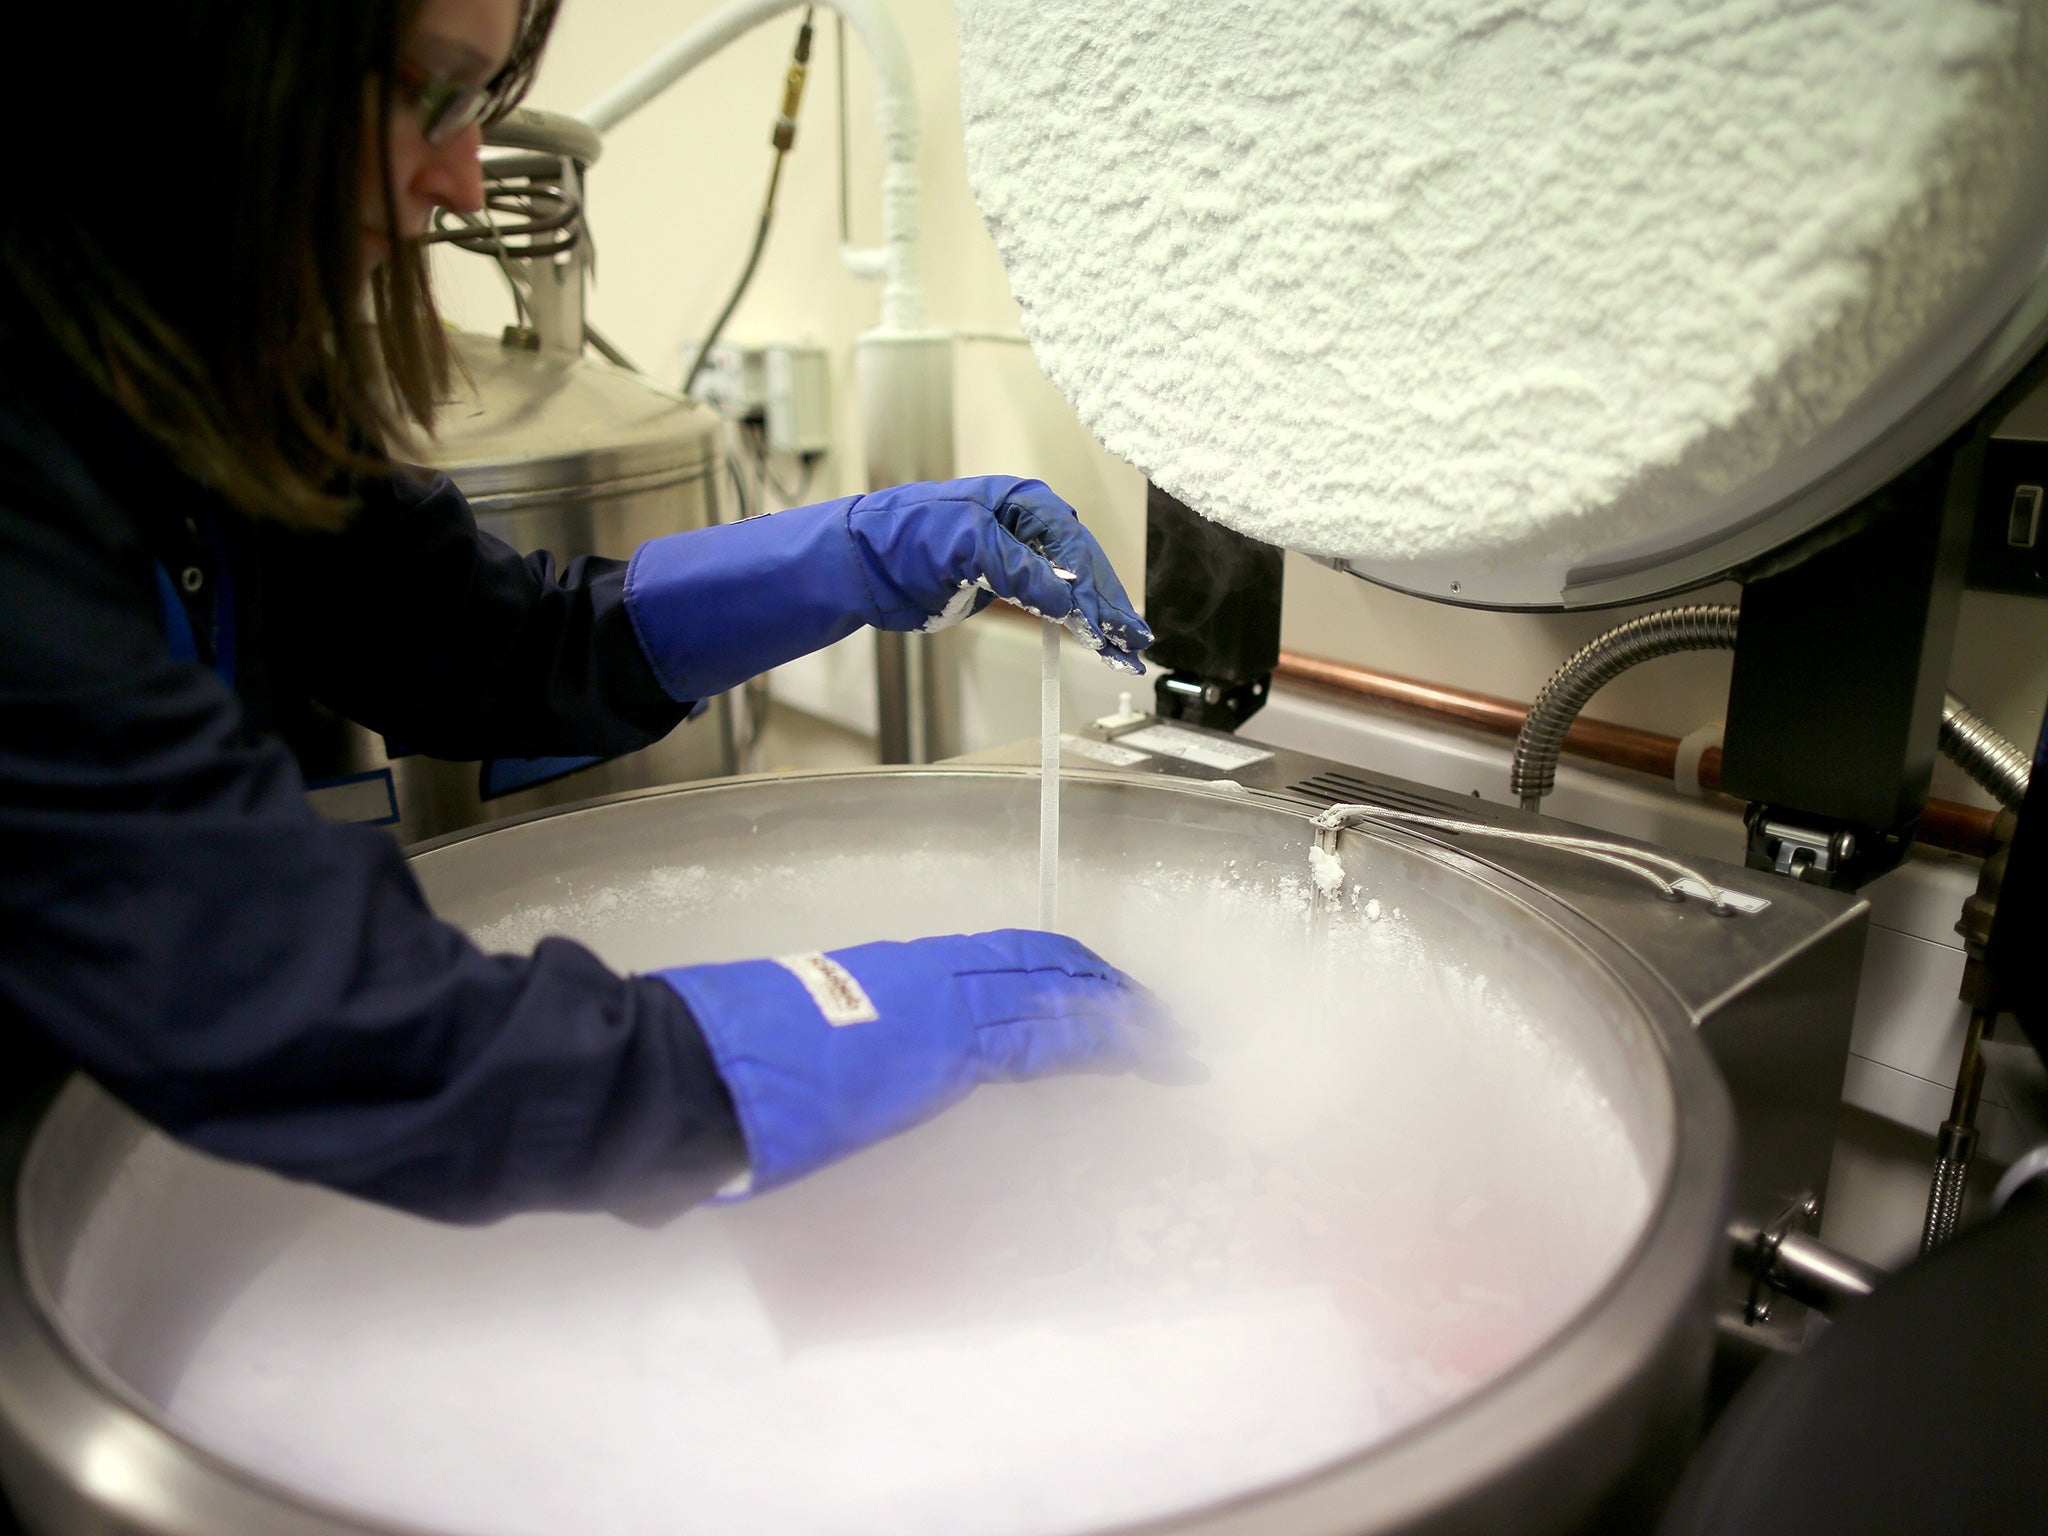 Sperm and embryo samples in the cryo store at Birmingham Women's Hospital fertility clinic